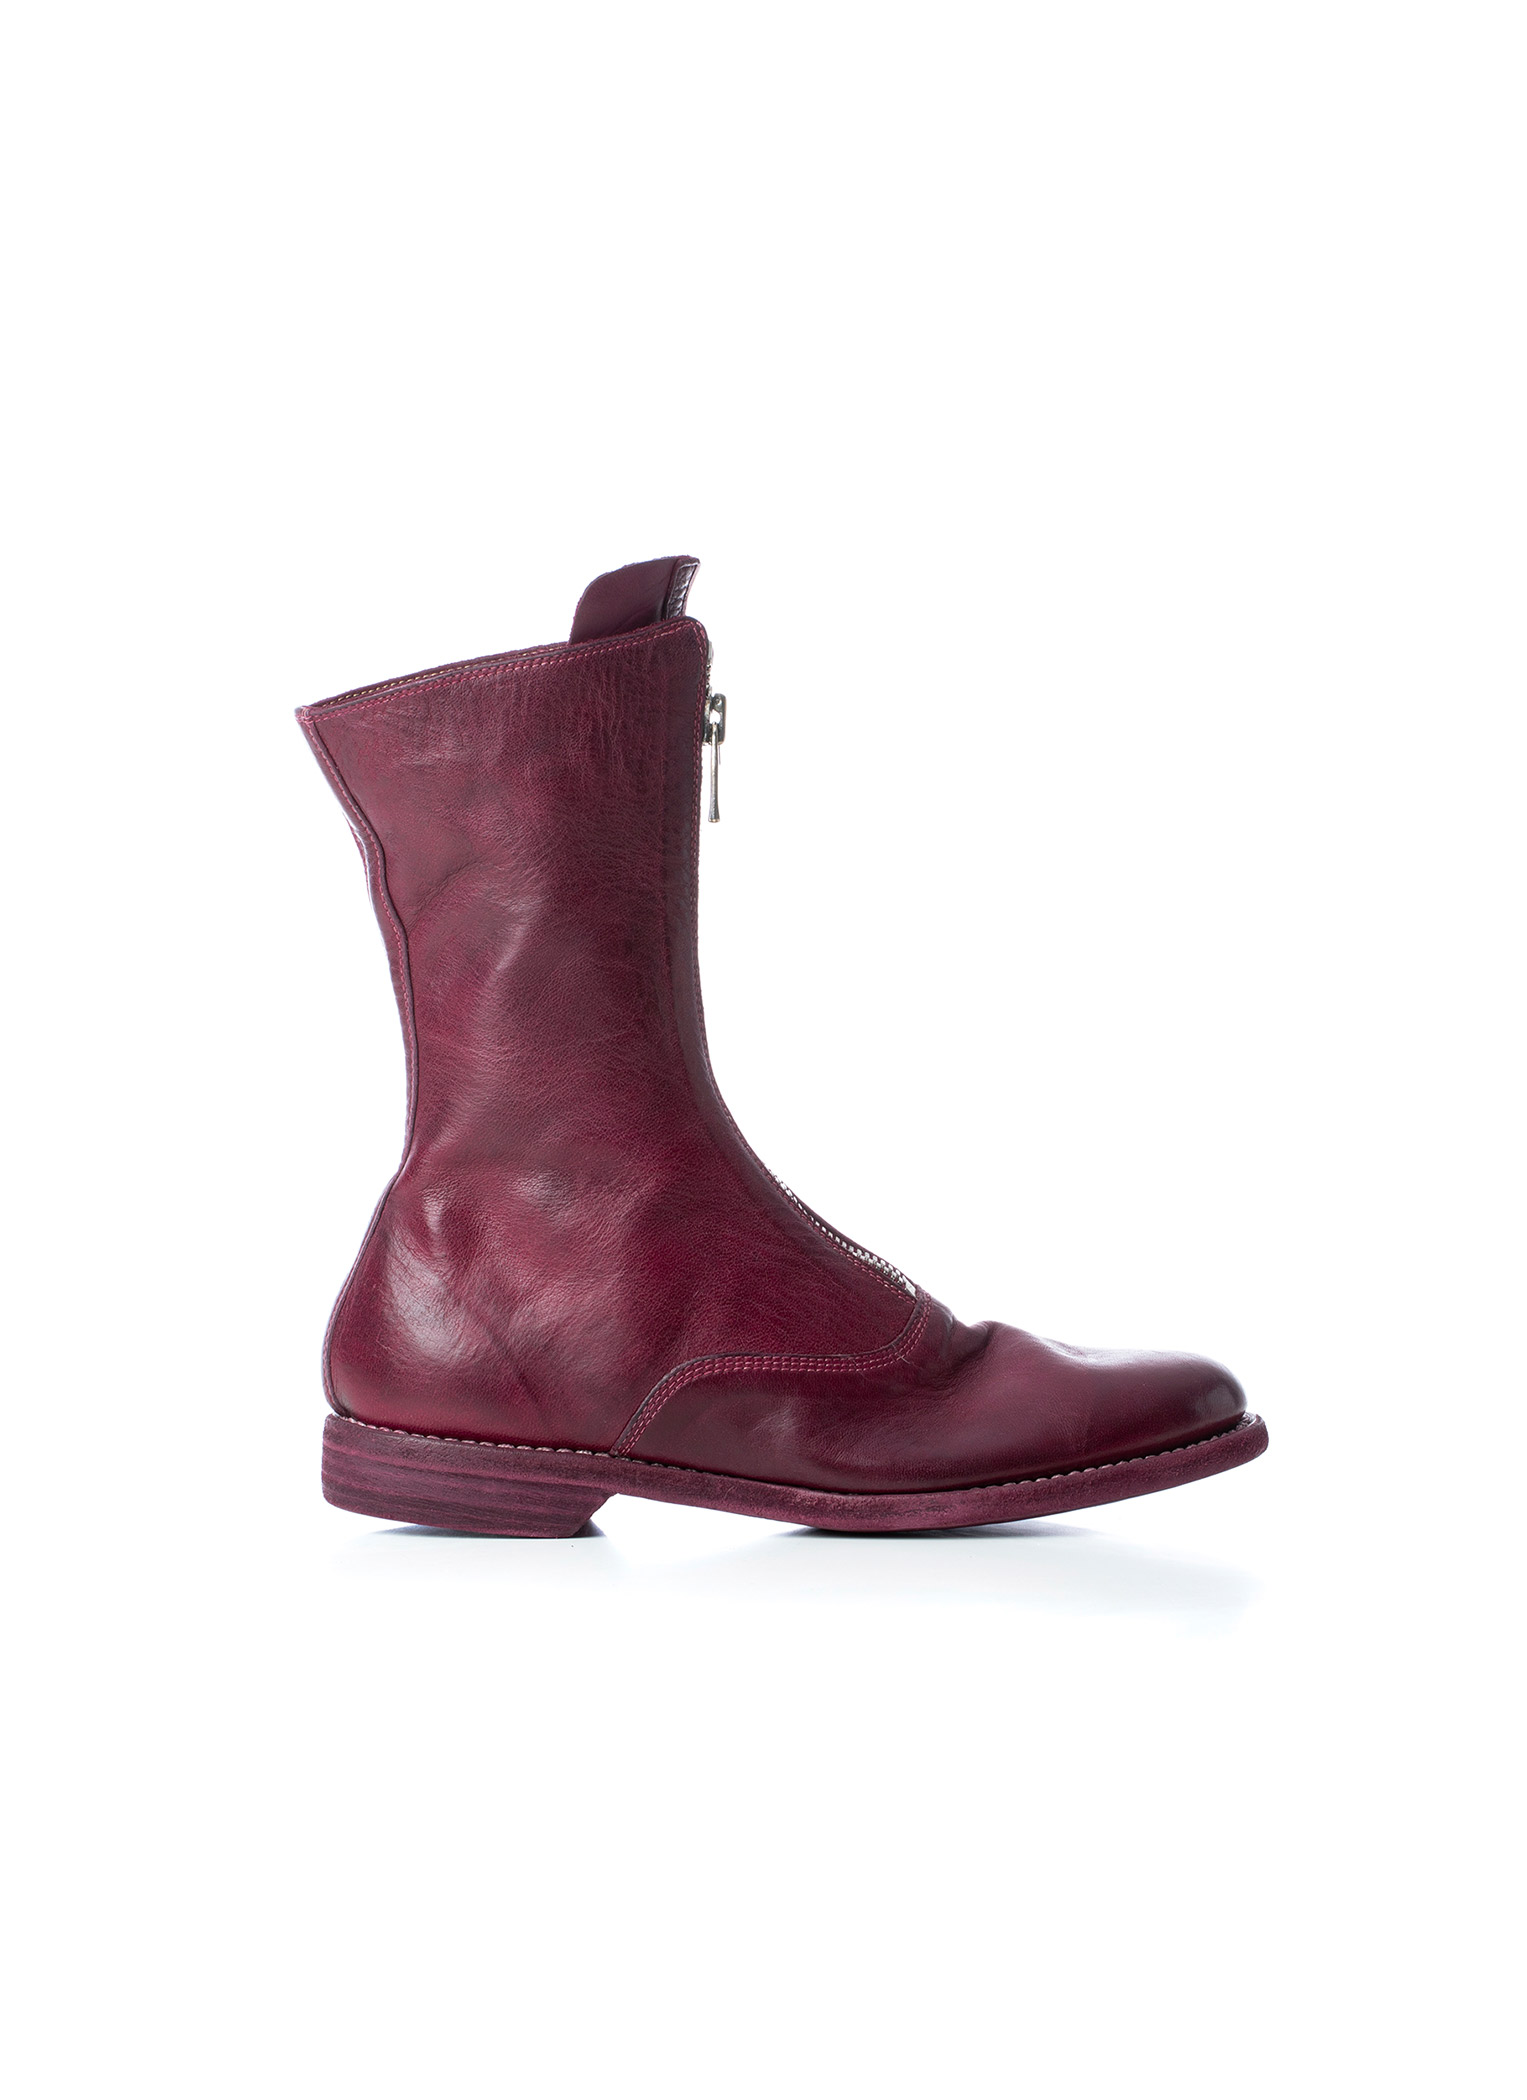 hide-m | GUIDI 310 Army Front Zip Boot Women, raspberry horse leather